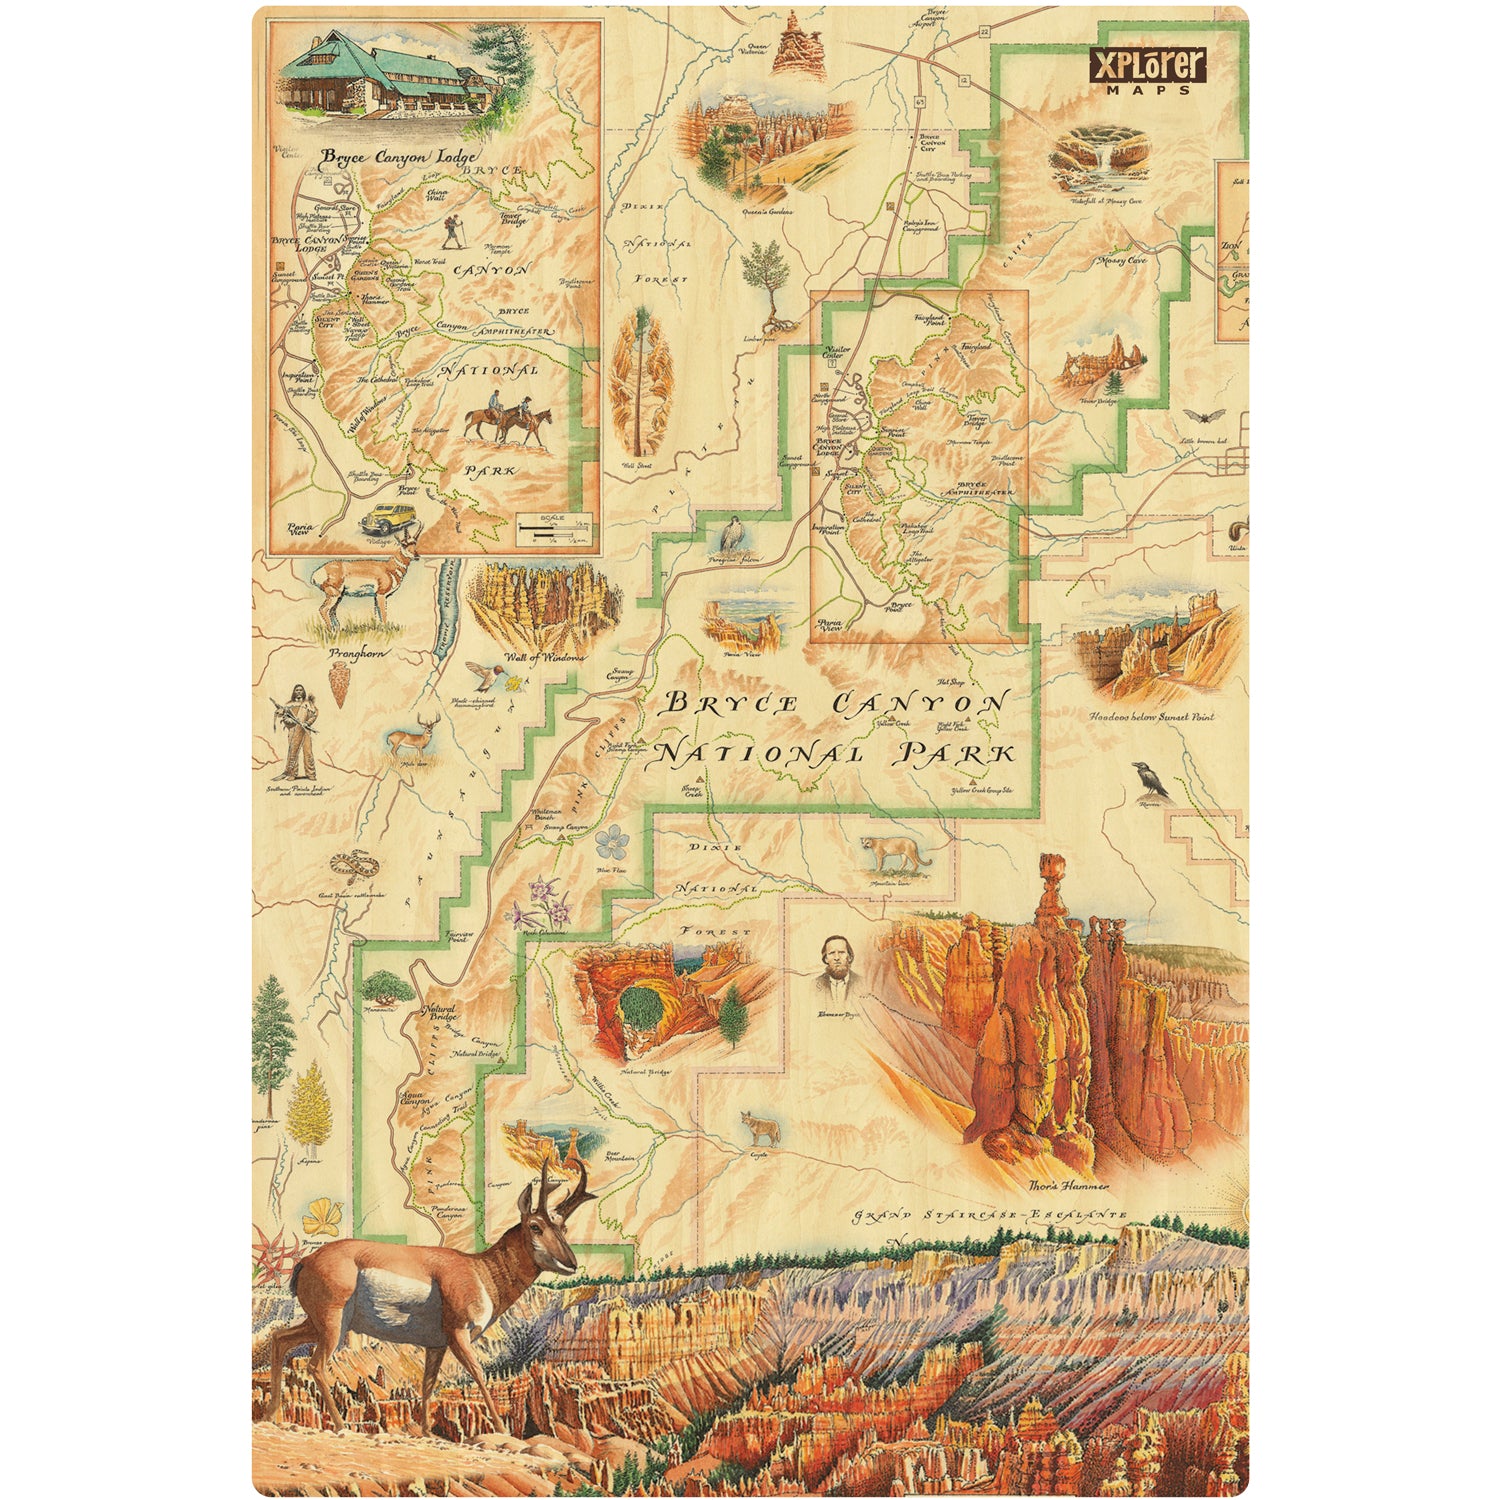 Bryce Canyon National Park Map wood sign on earth tone colors featuring canyons, horseback, hoodoos, Rim Trail, Sunrise Point, Sunset Point, Inspiration Point and Bryce Point.